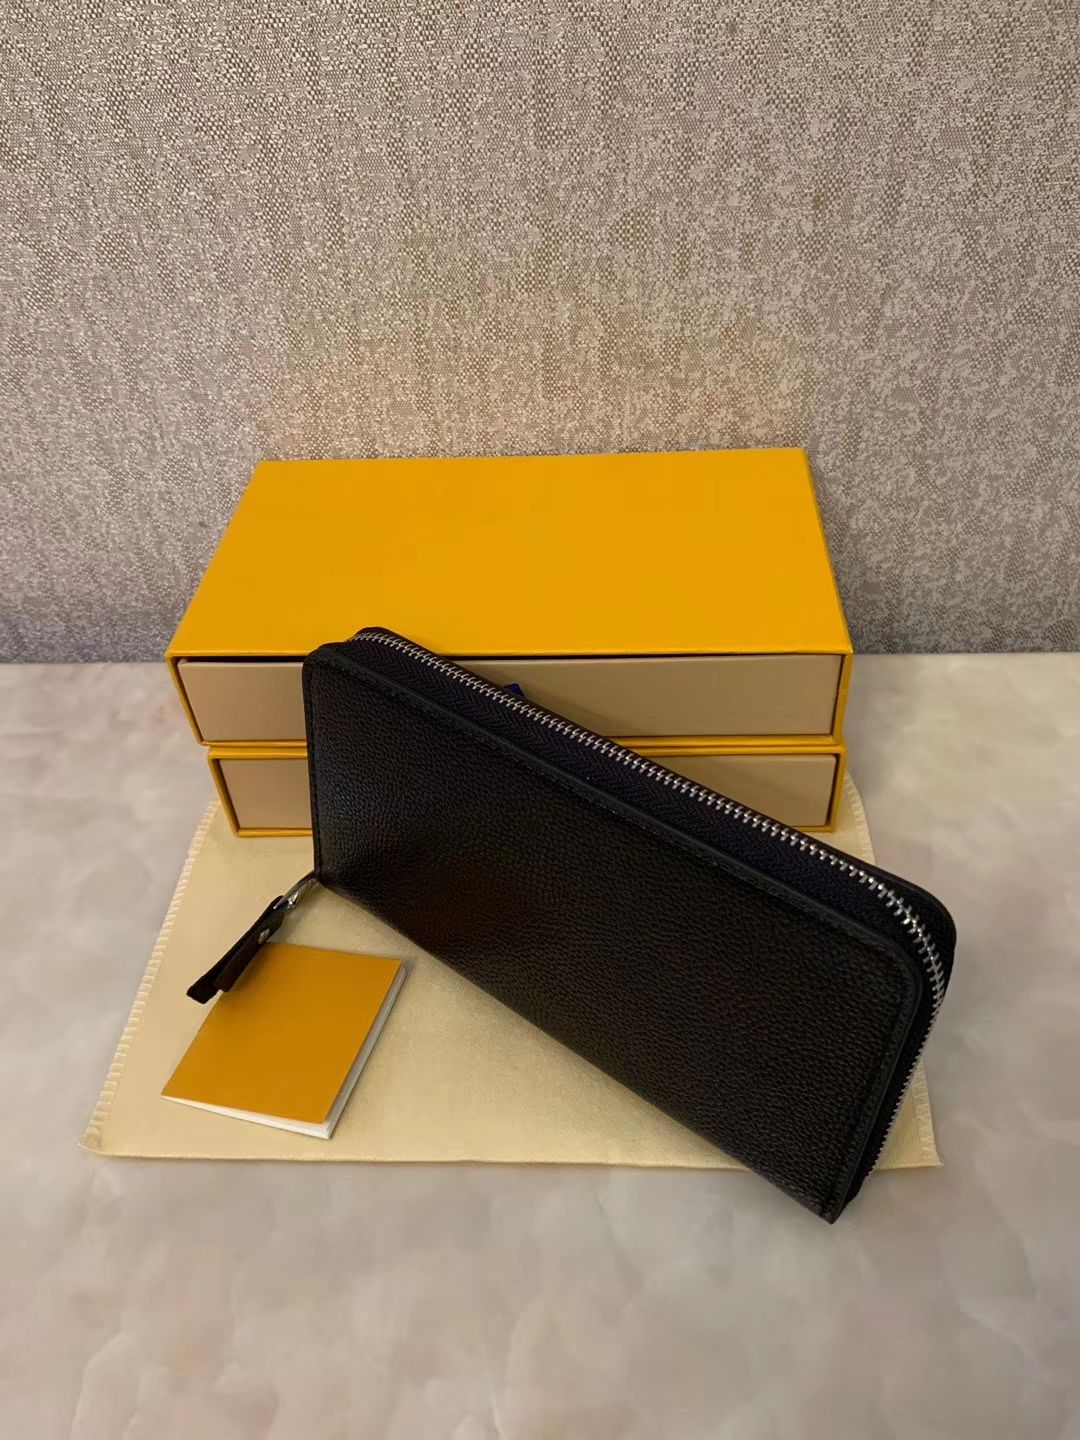 Single Zipper WALLET The Most Stylish Way To Carry Around Money Cards And  Coins Men Leather Purse Card Holder Long Business Women Wallet From  Hot_bag1688, $13.51